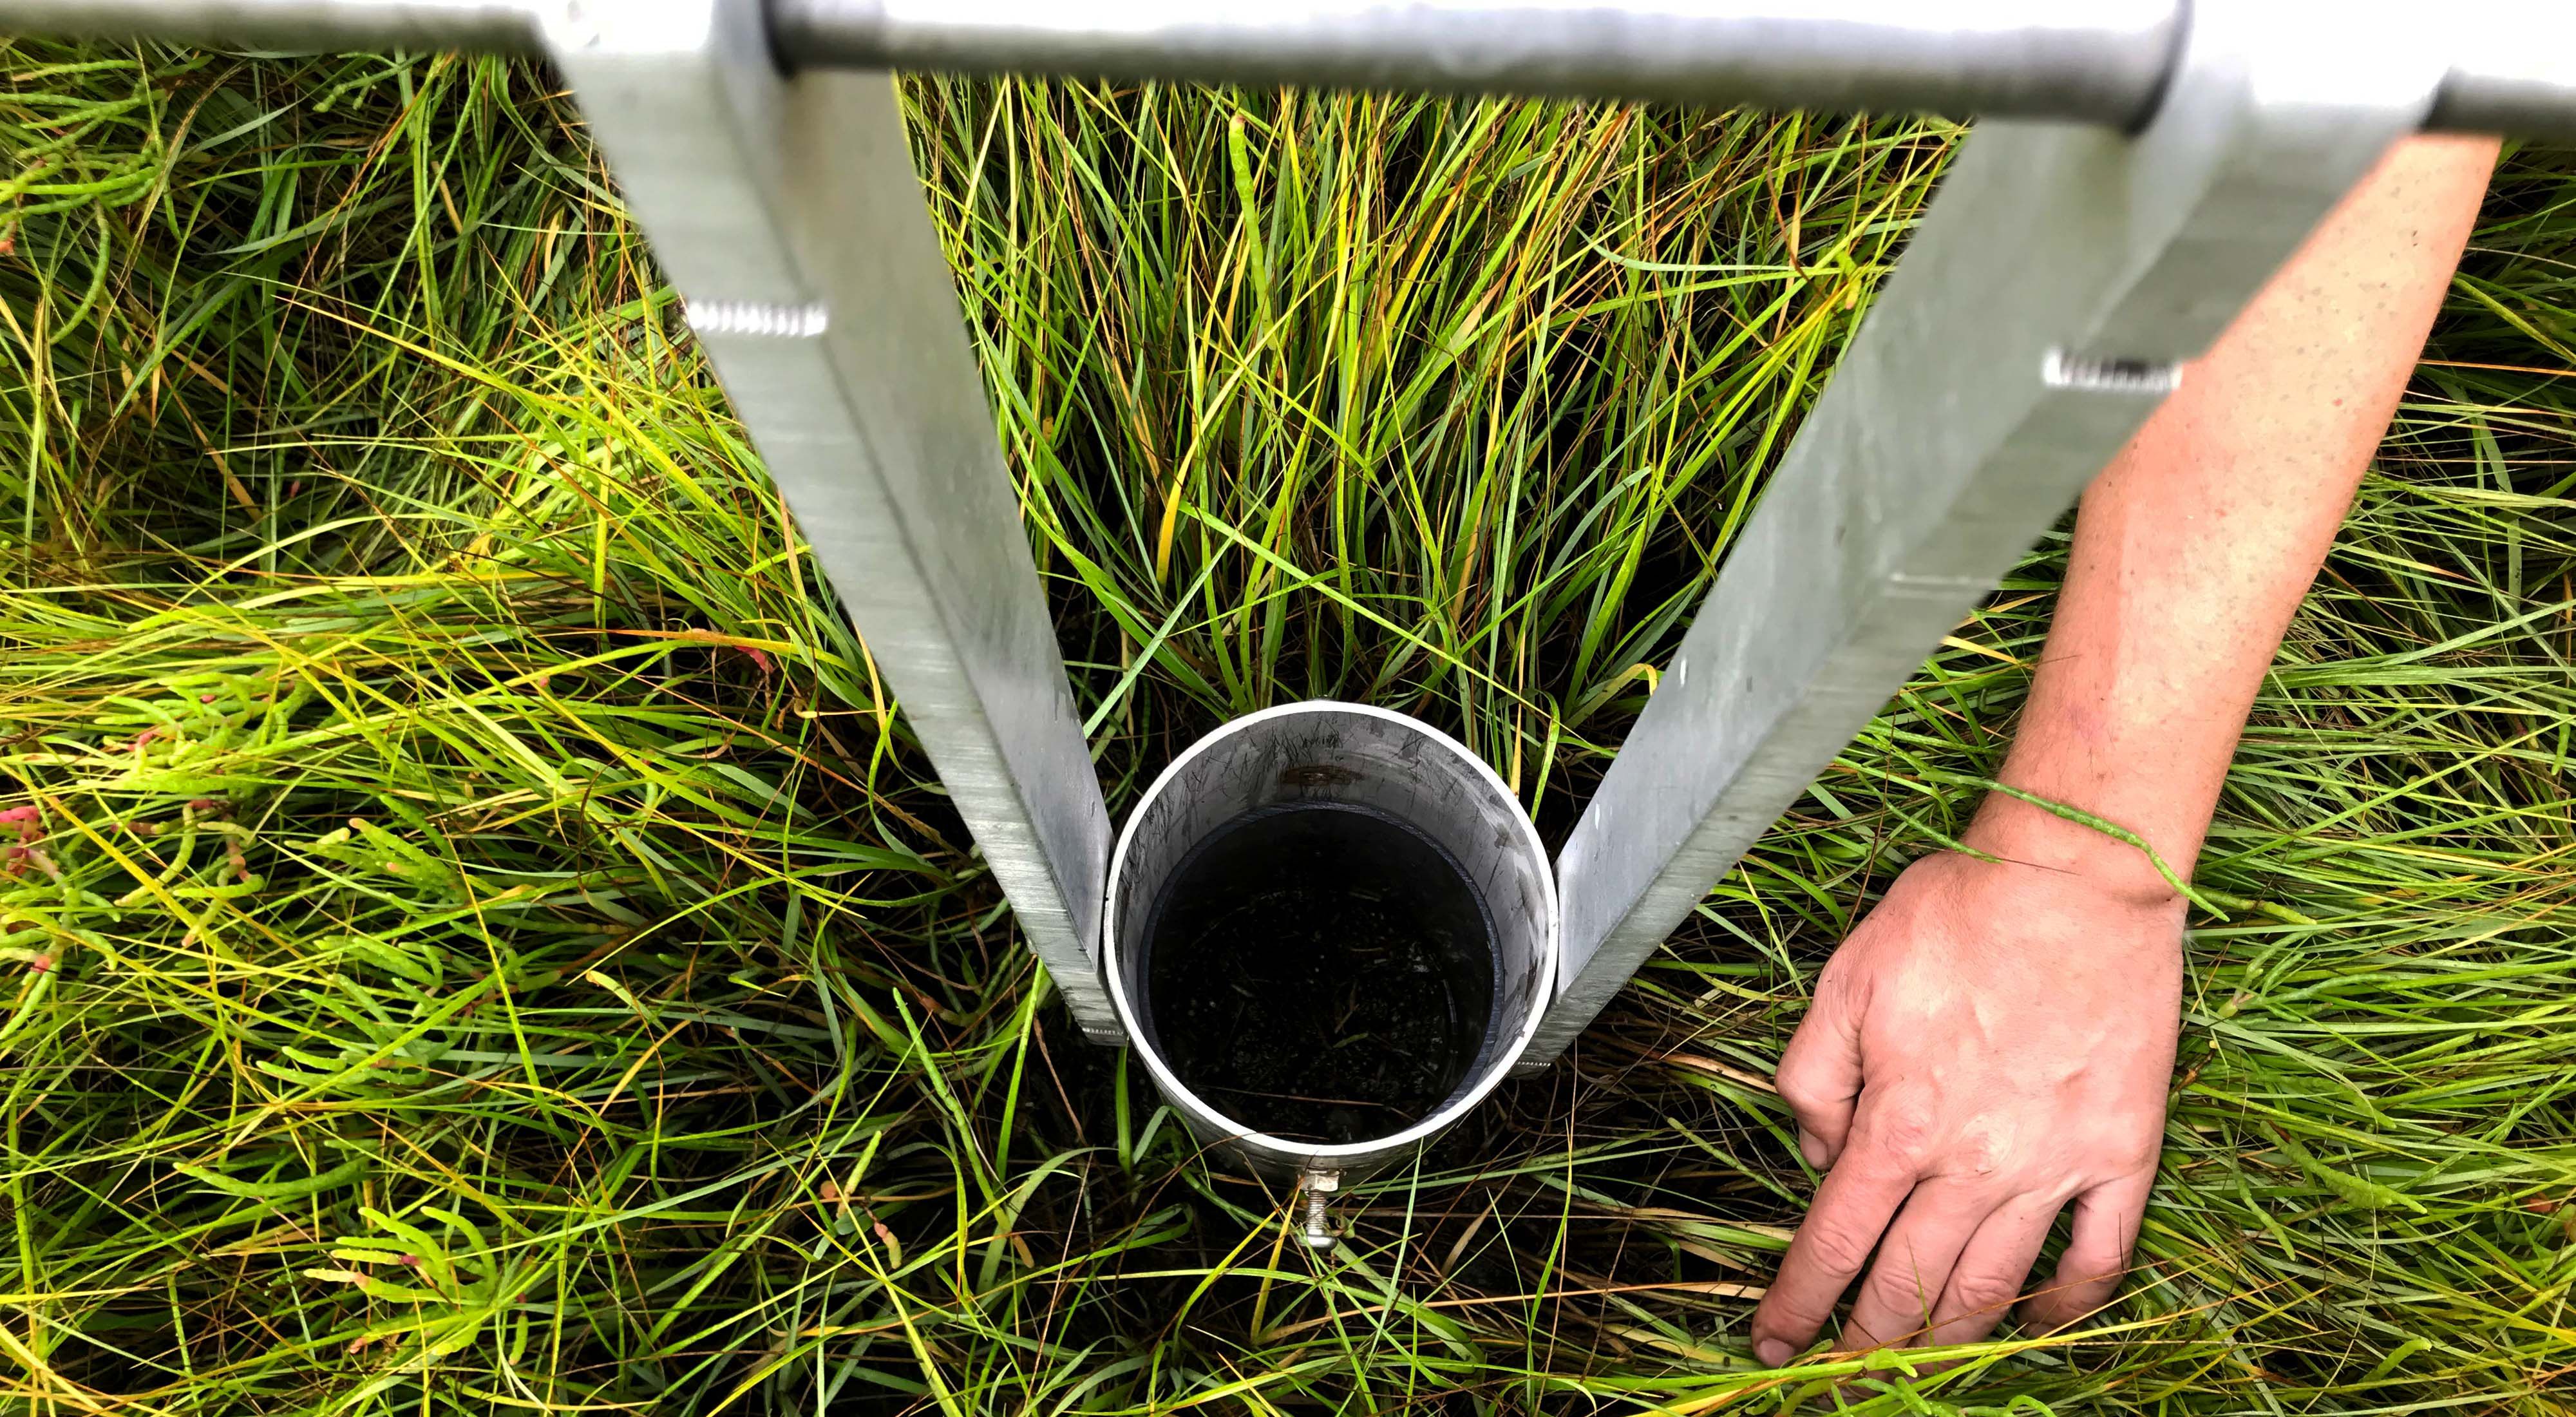 View looking down on a metal cylinder cutting a core sample in salt marsh grass and soil.